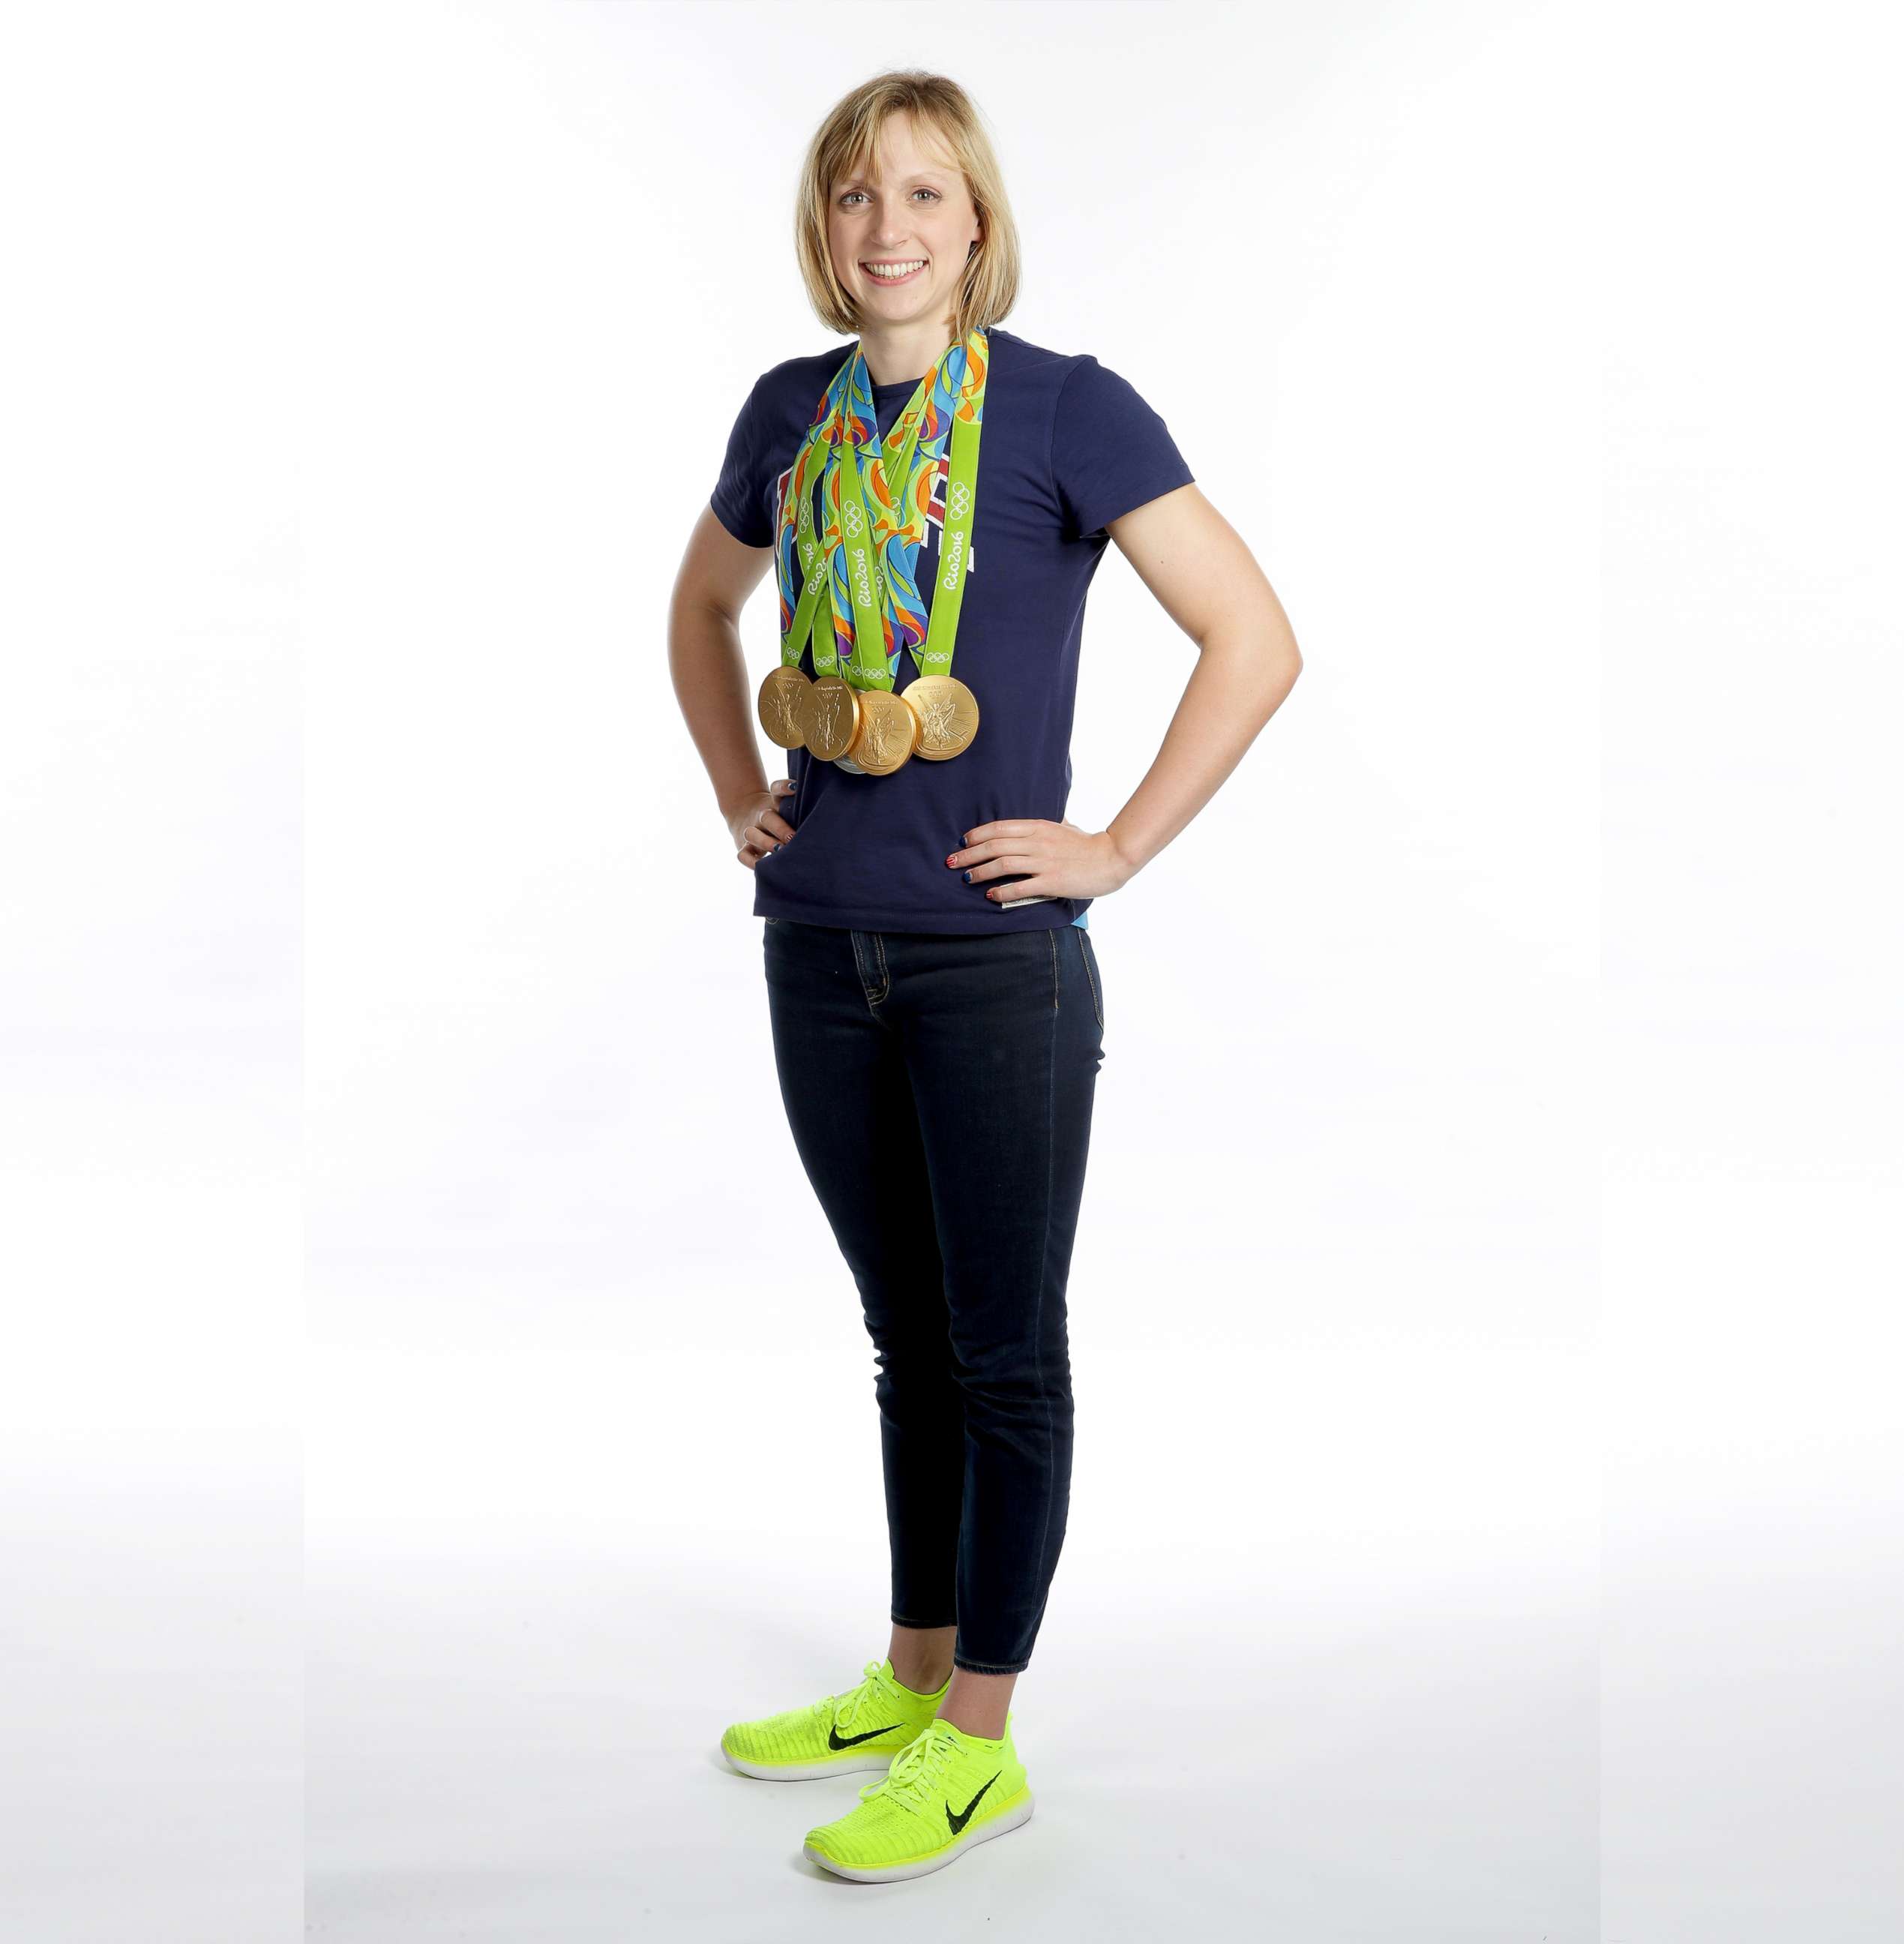 PHOTO: Swimmer Katie Ledecky of the United States poses for a portrait on Day 8 of the Rio 2016 Olympic Games on Aug. 13, 2016 in Rio de Janeiro, Brazil.